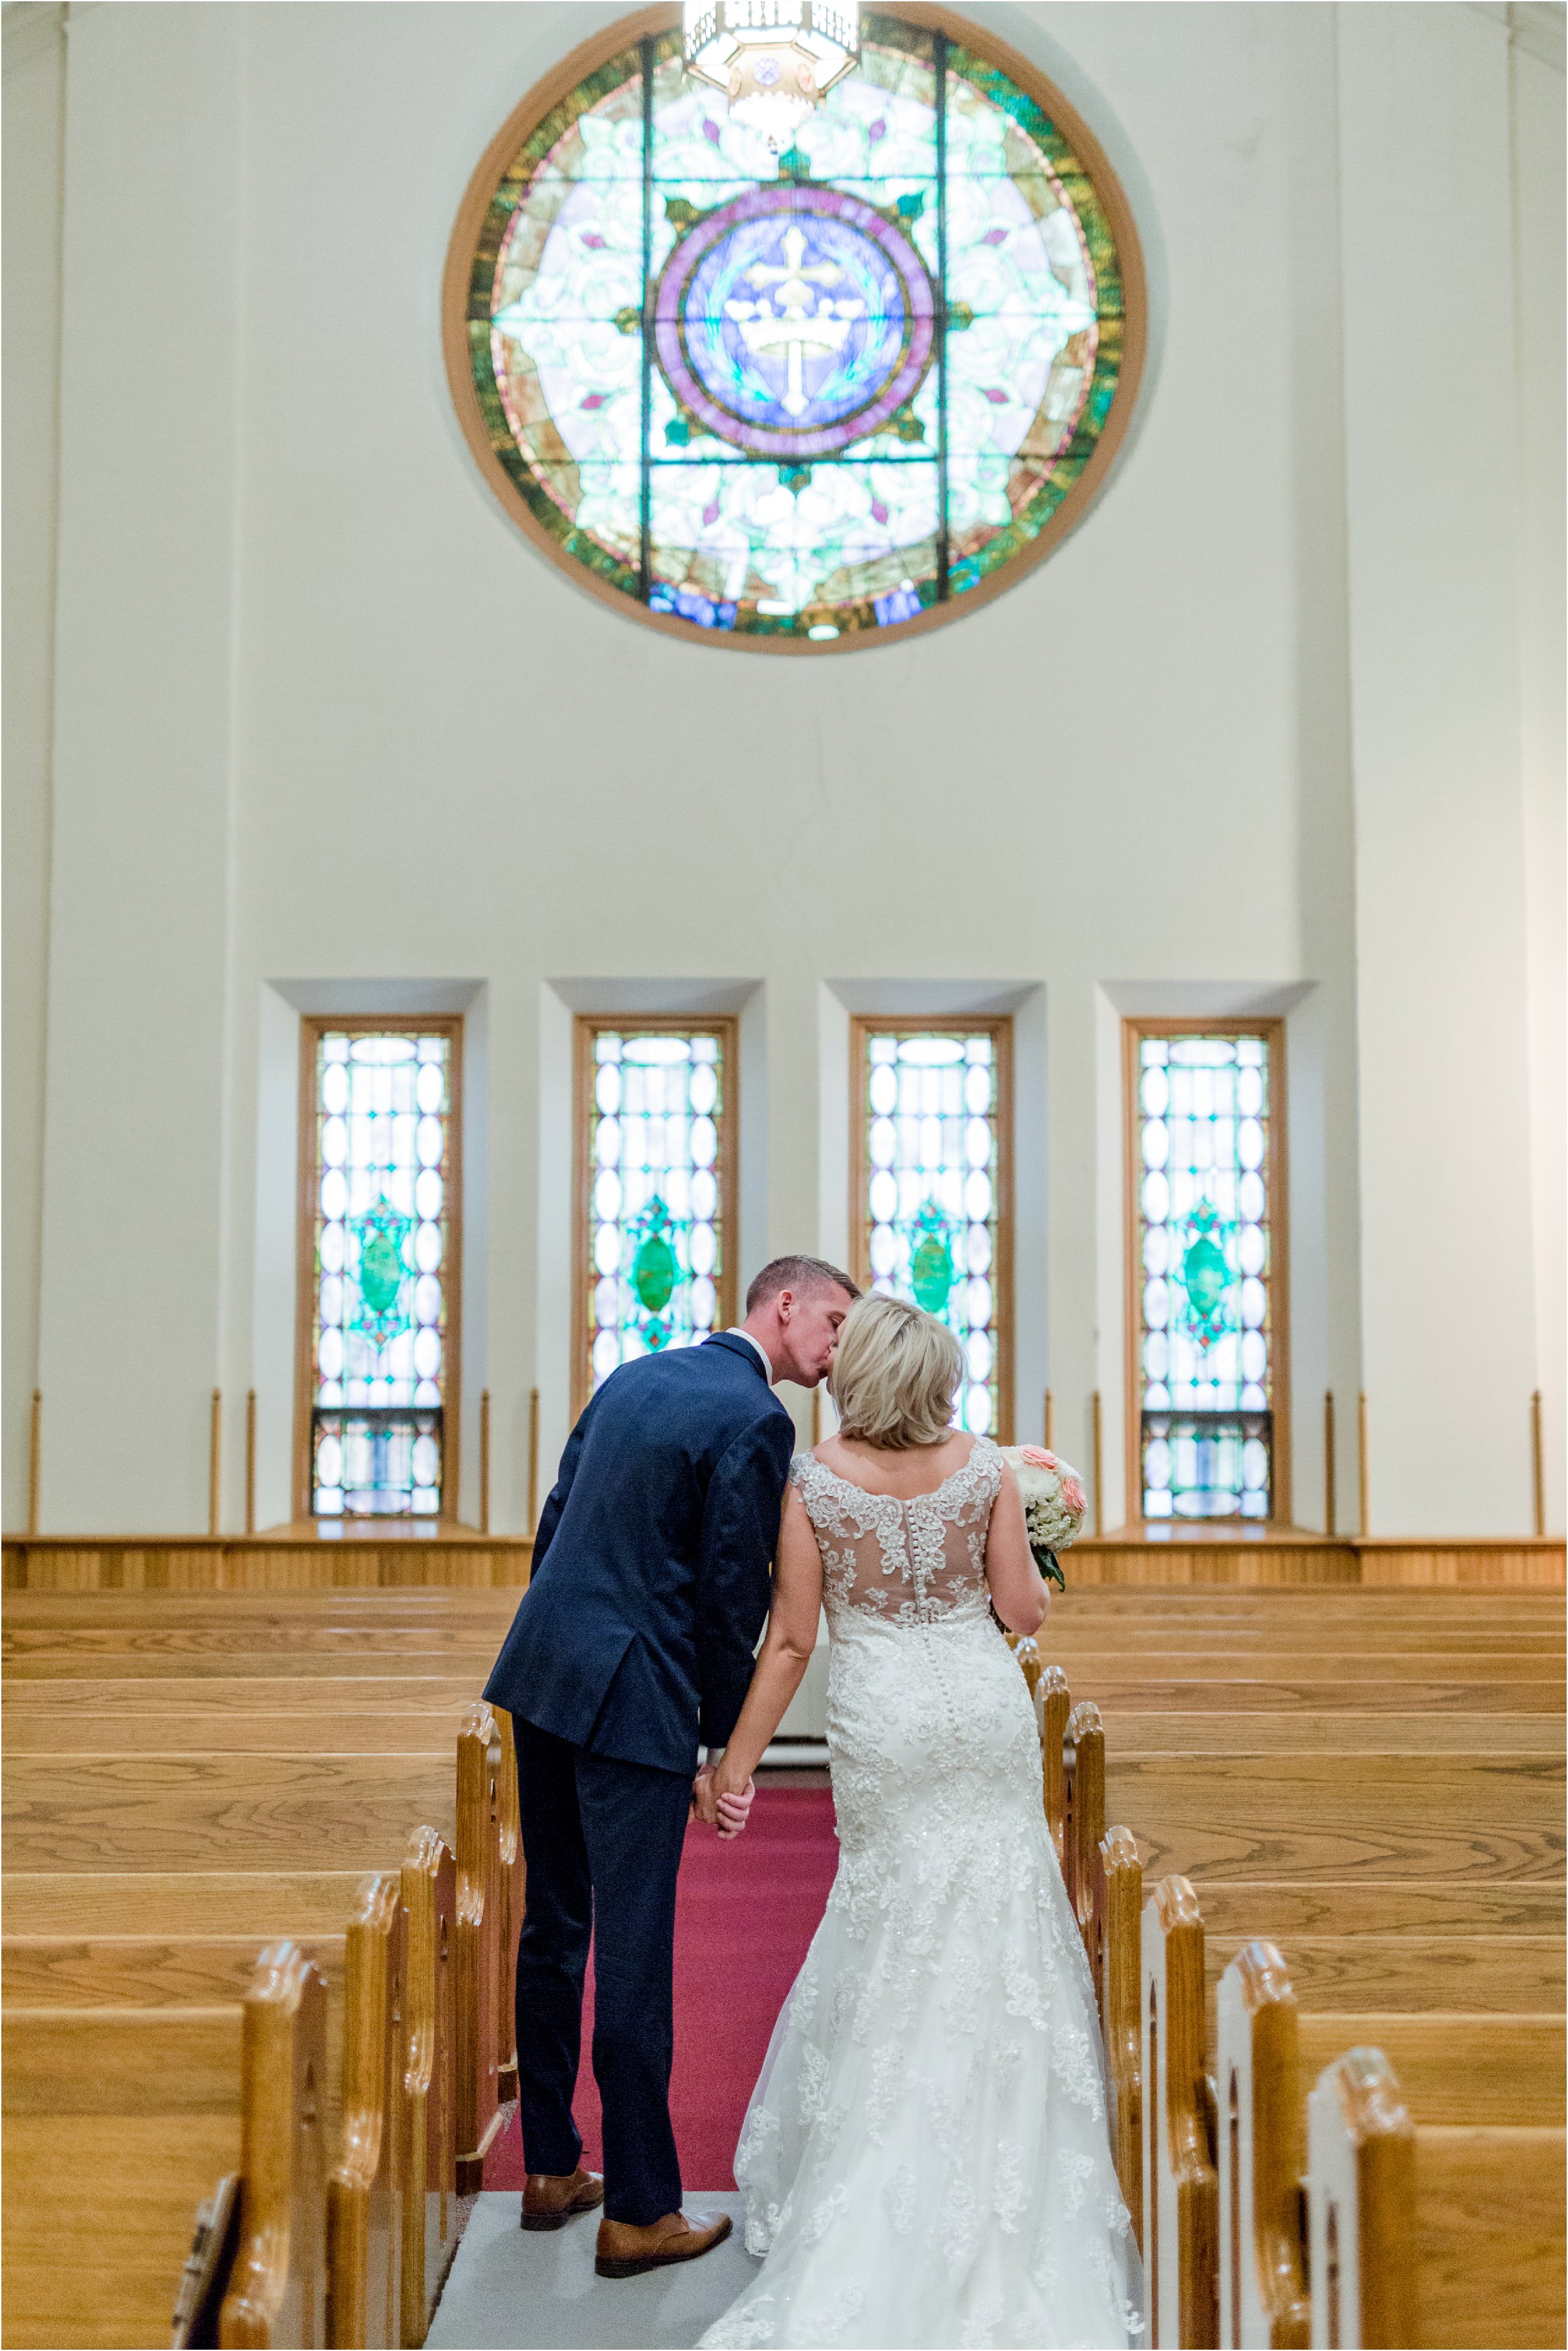 bride and groom kiss in church sanctuary with round stained glass window in the background